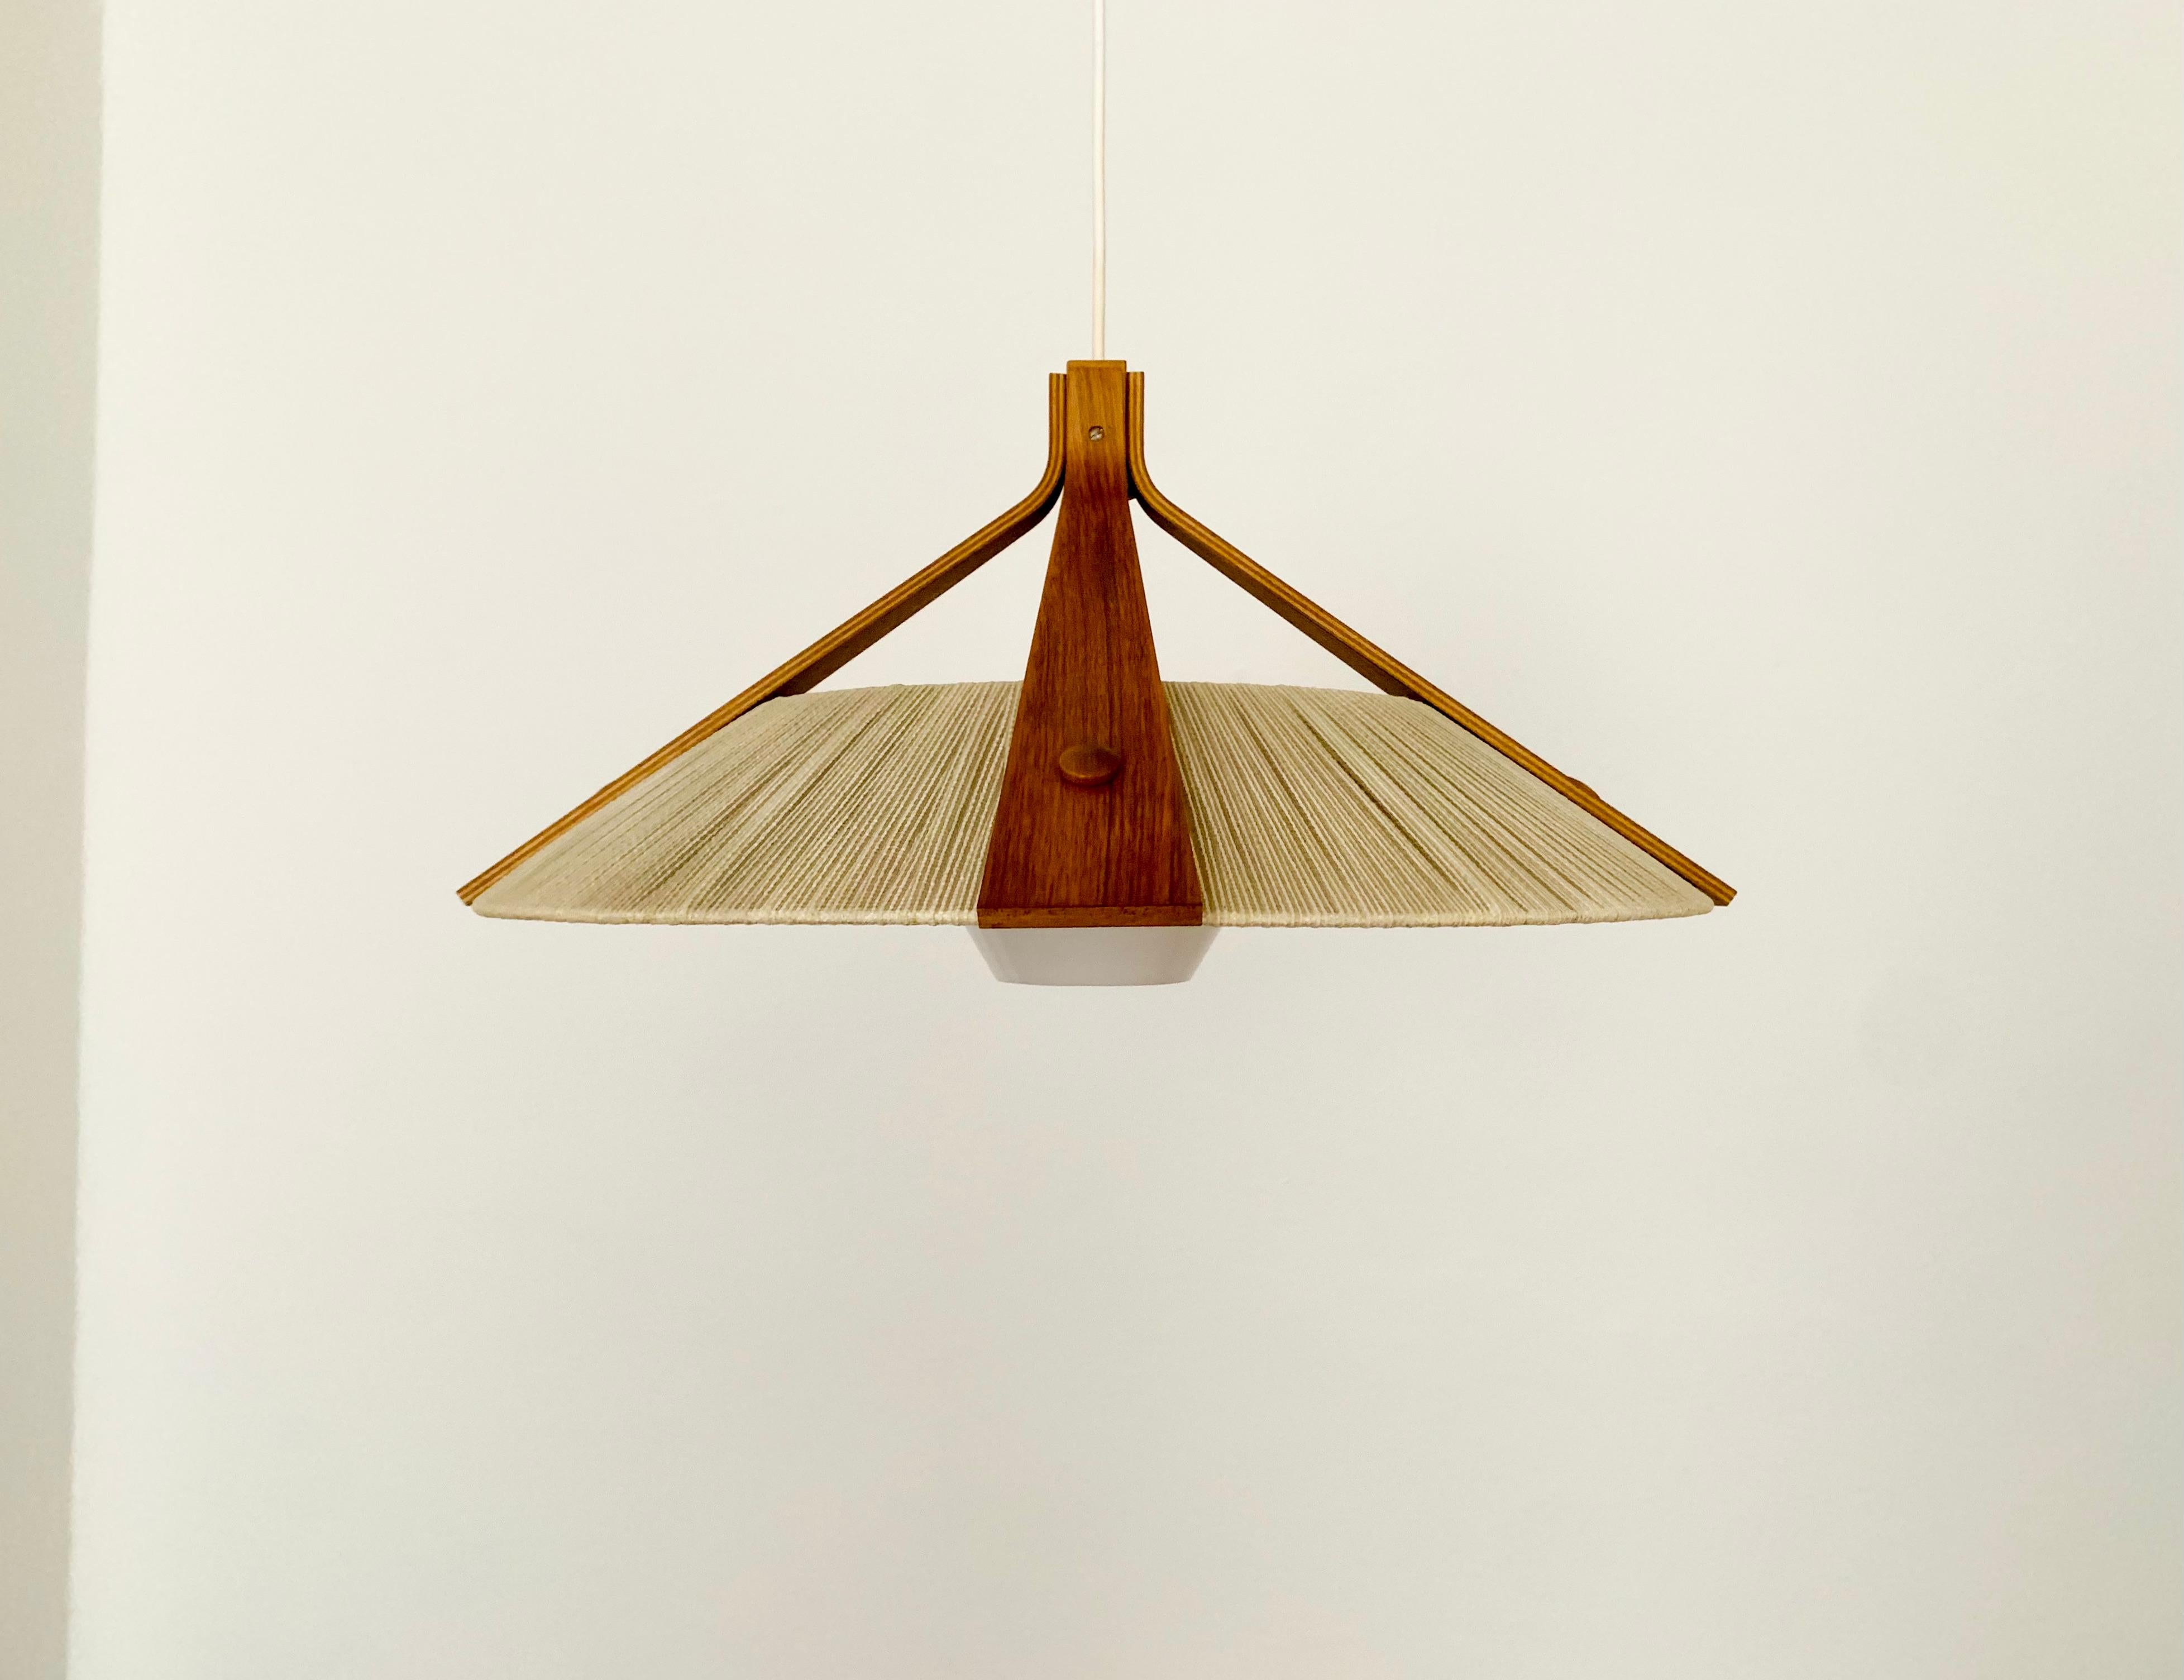 Exceptionally beautiful and large pendant light from the 1960s.
The design is very unusual.
The shape and the materials create a warm and very pleasant light.

Condition:

Very good vintage condition with slight signs of wear consistent with